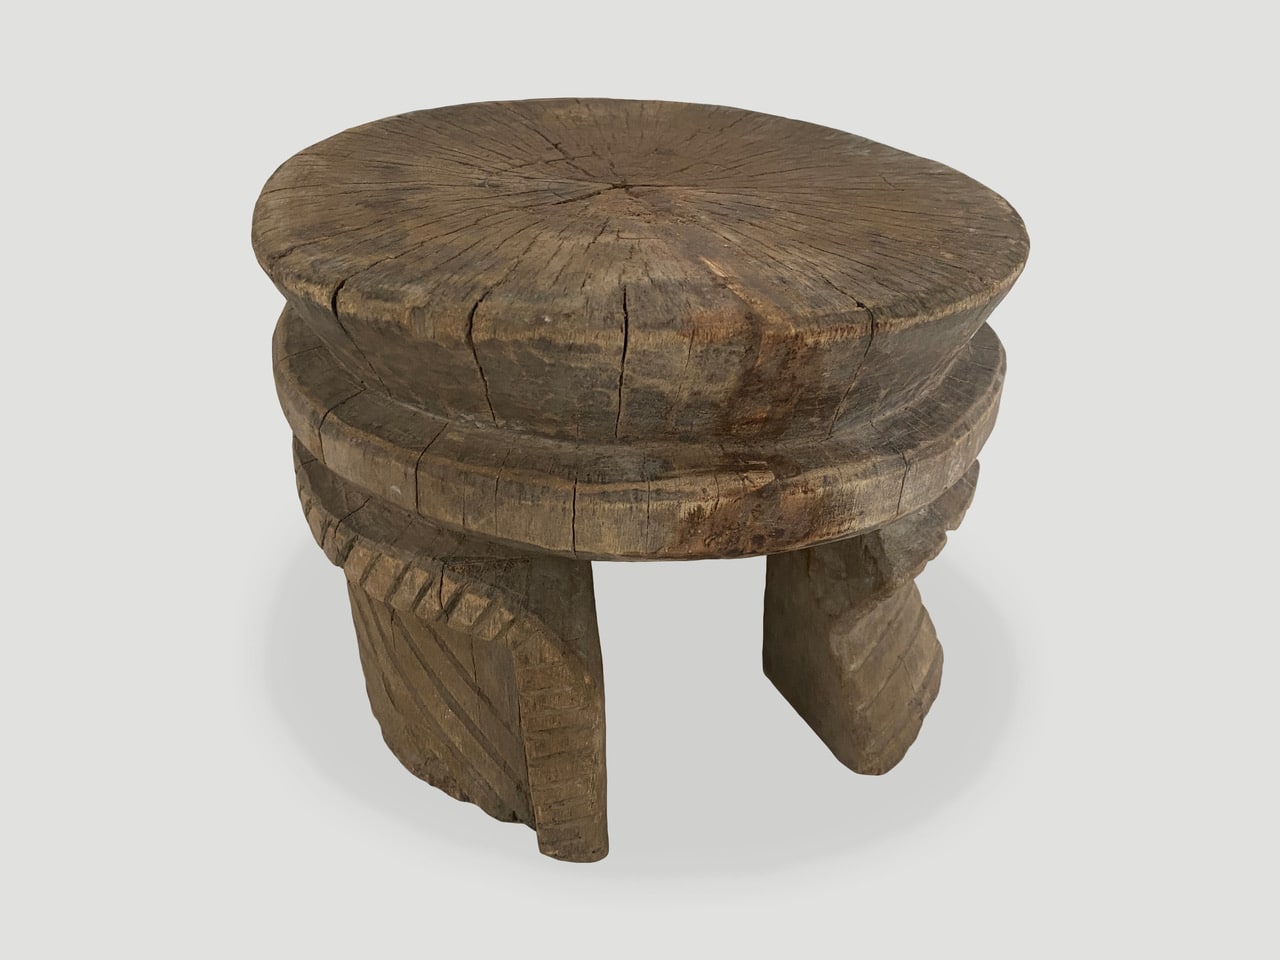 ANTIQUE HAND CARVED AFRICAN SIDE TABLE OR STOOL.